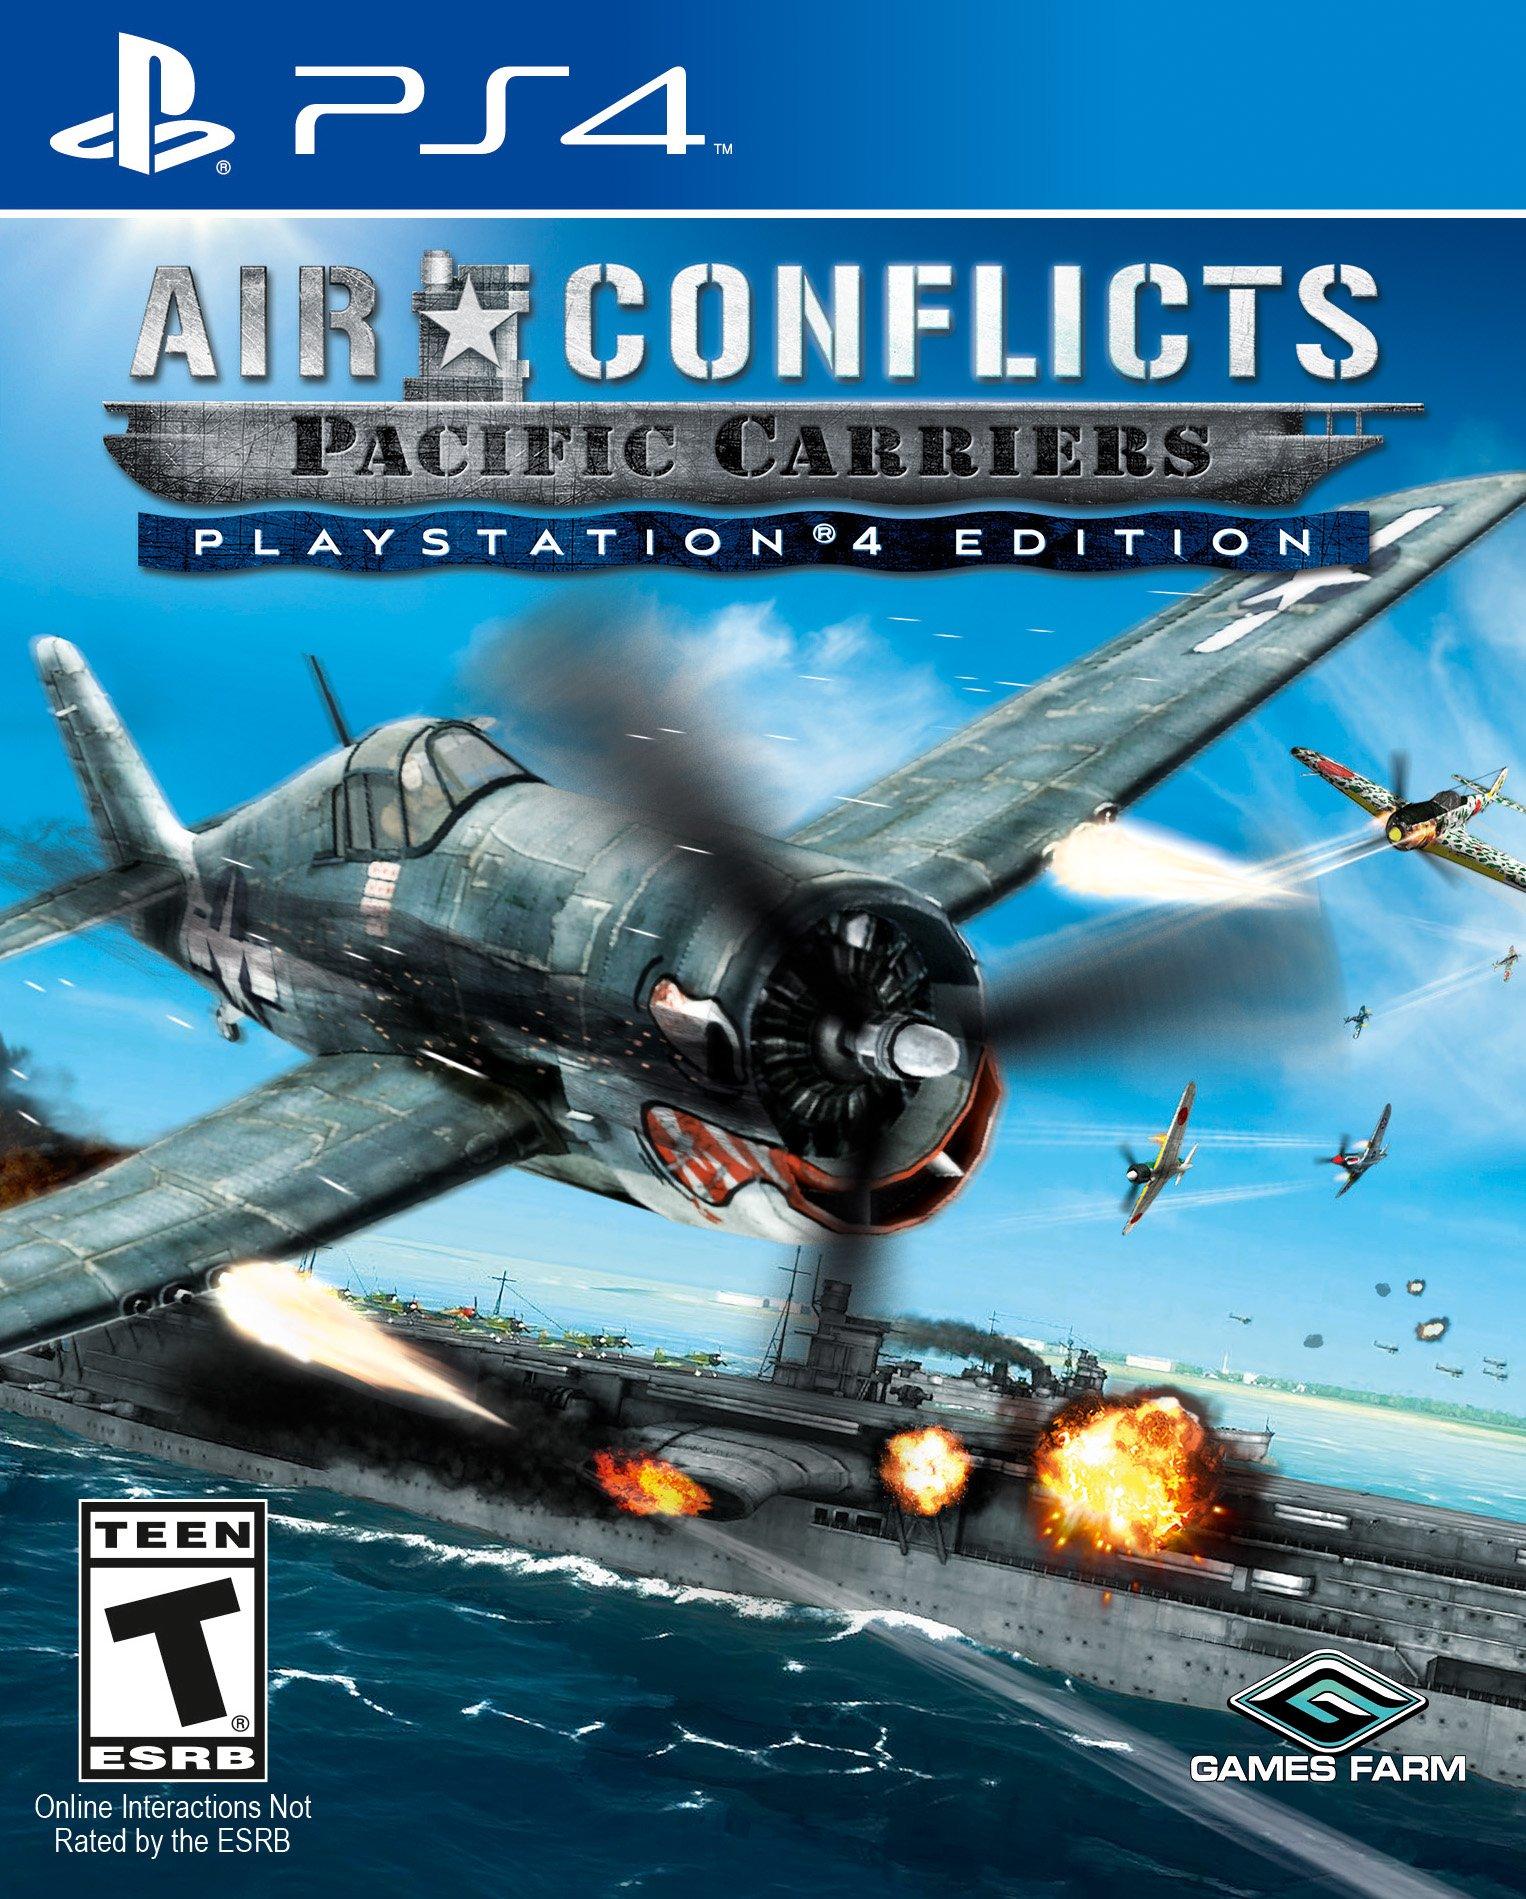 Air Conflicts Pacific Carriers - Ps3 (Seminovo) - Arena Games - Loja Geek